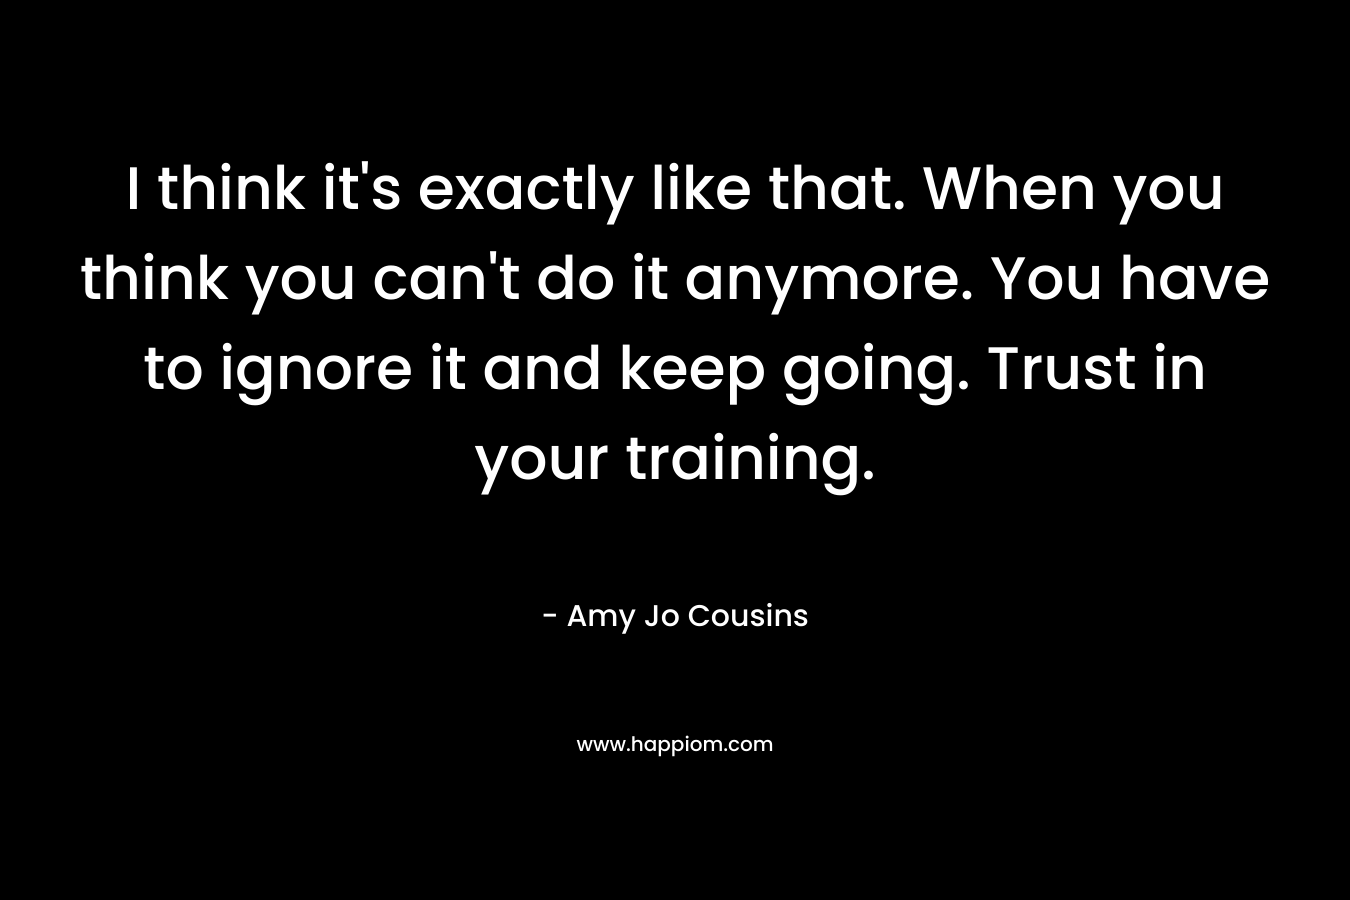 I think it's exactly like that. When you think you can't do it anymore. You have to ignore it and keep going. Trust in your training.